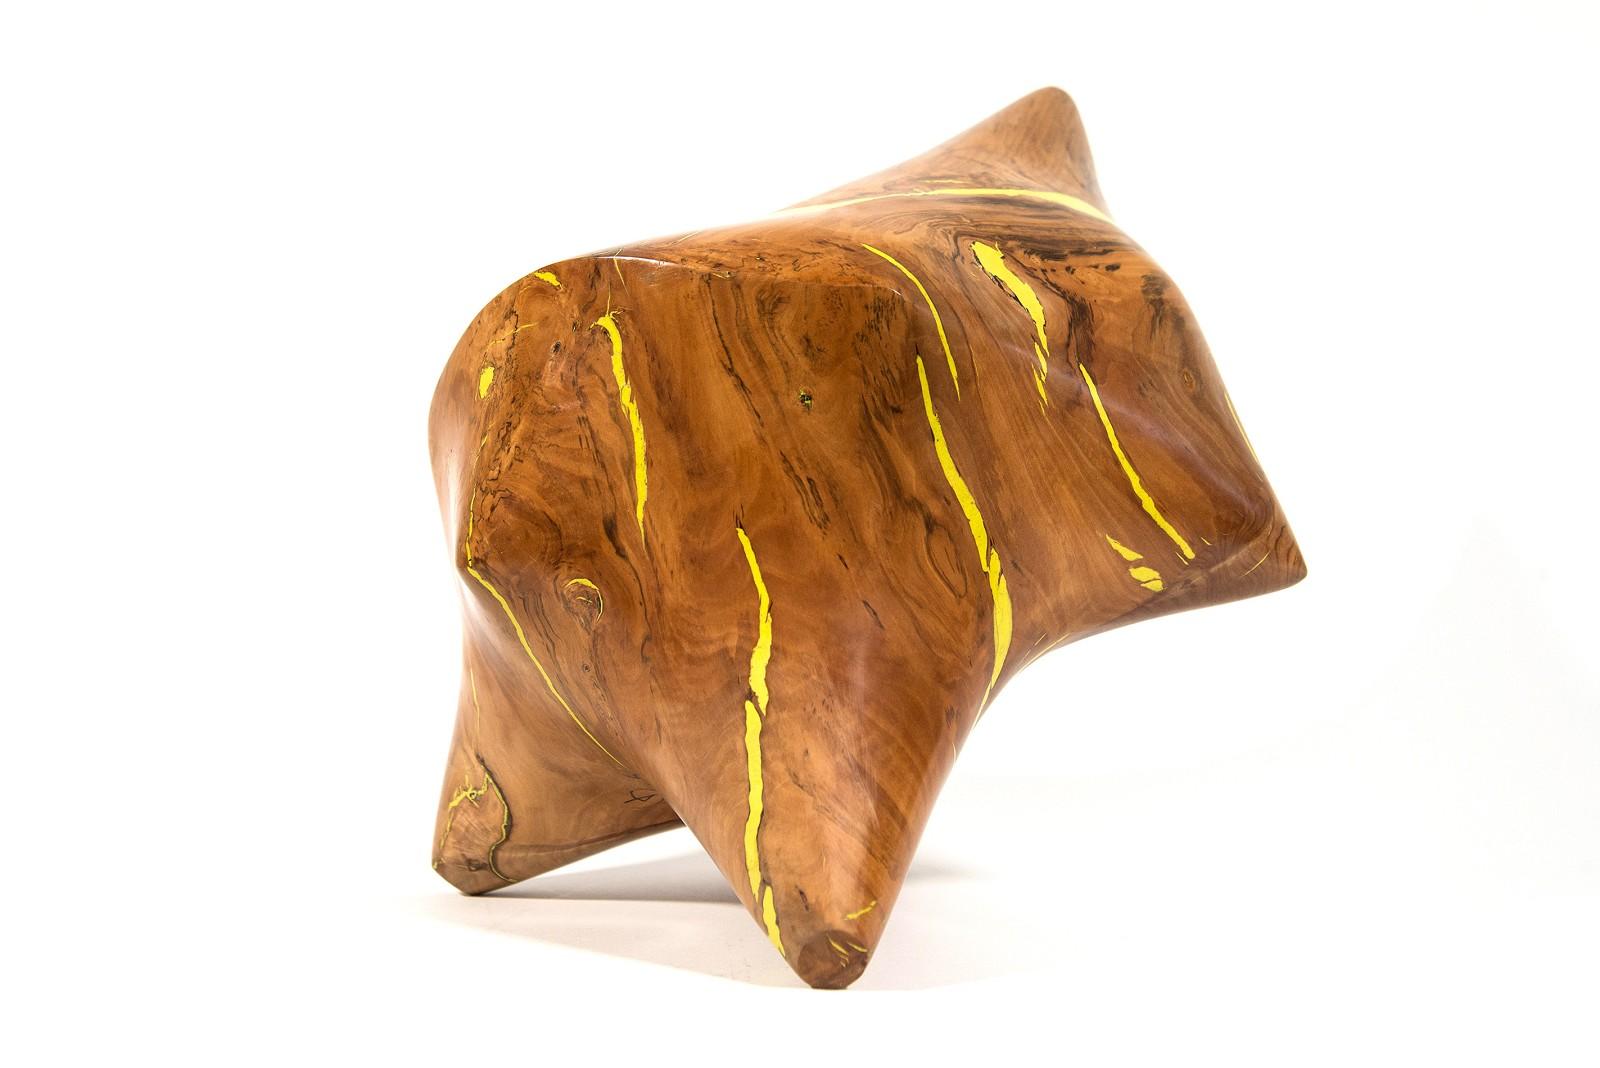 Windfall Series II No 7 - smooth, carved, abstract, Applewood & resin sculpture - Sculpture by Shayne Dark